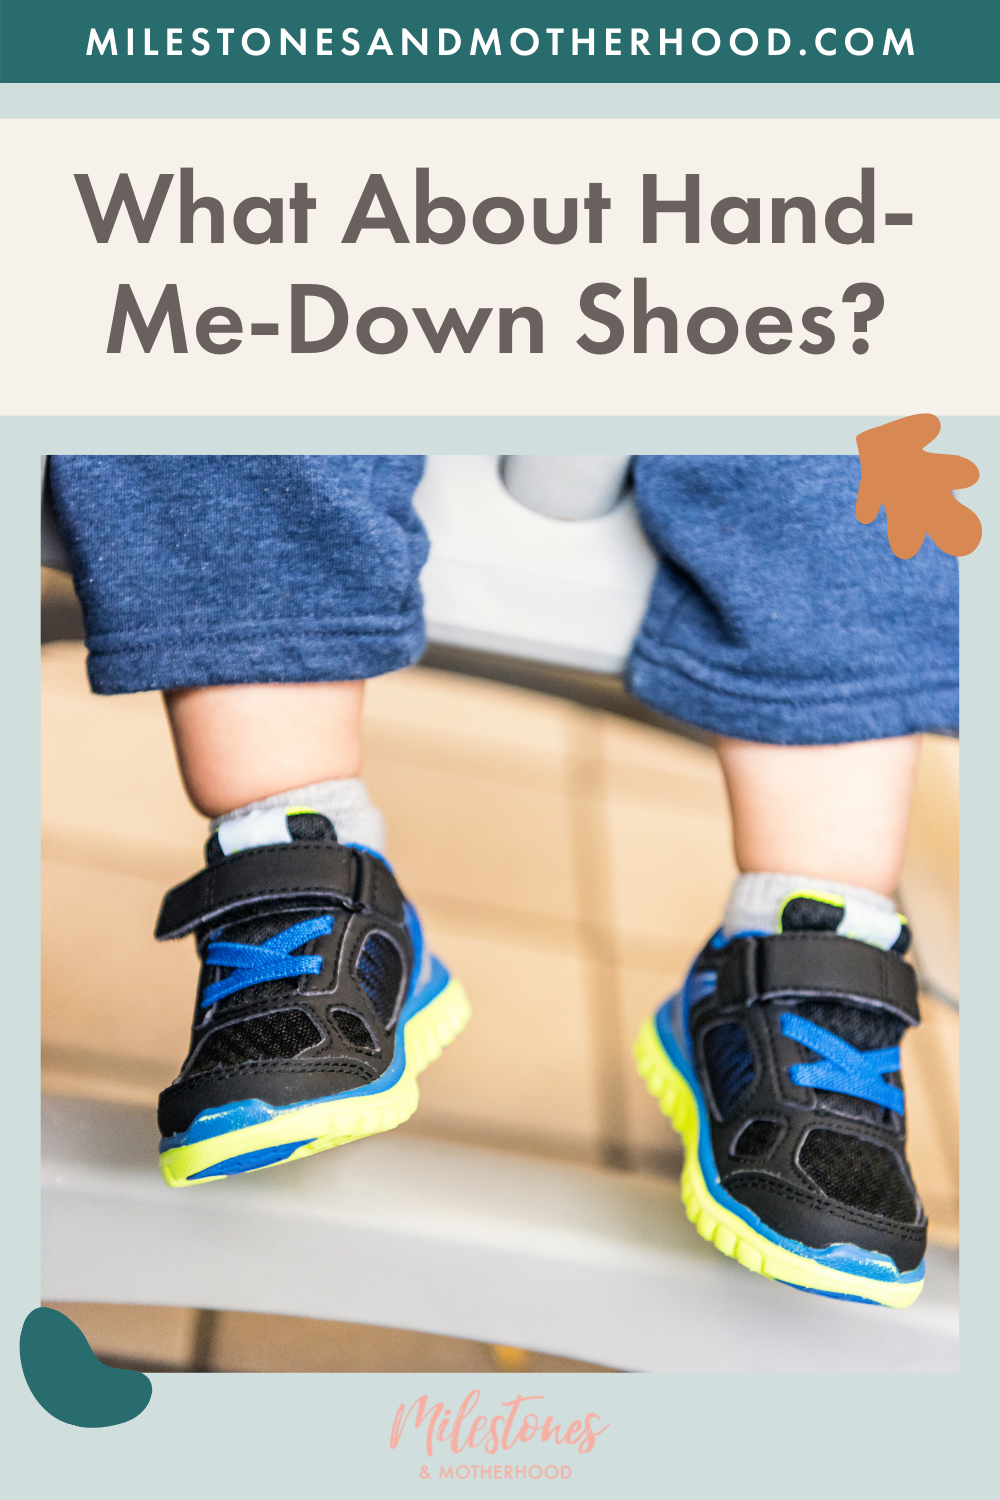 What About Hand-Me-Down Shoes? — Milestones & Motherhood